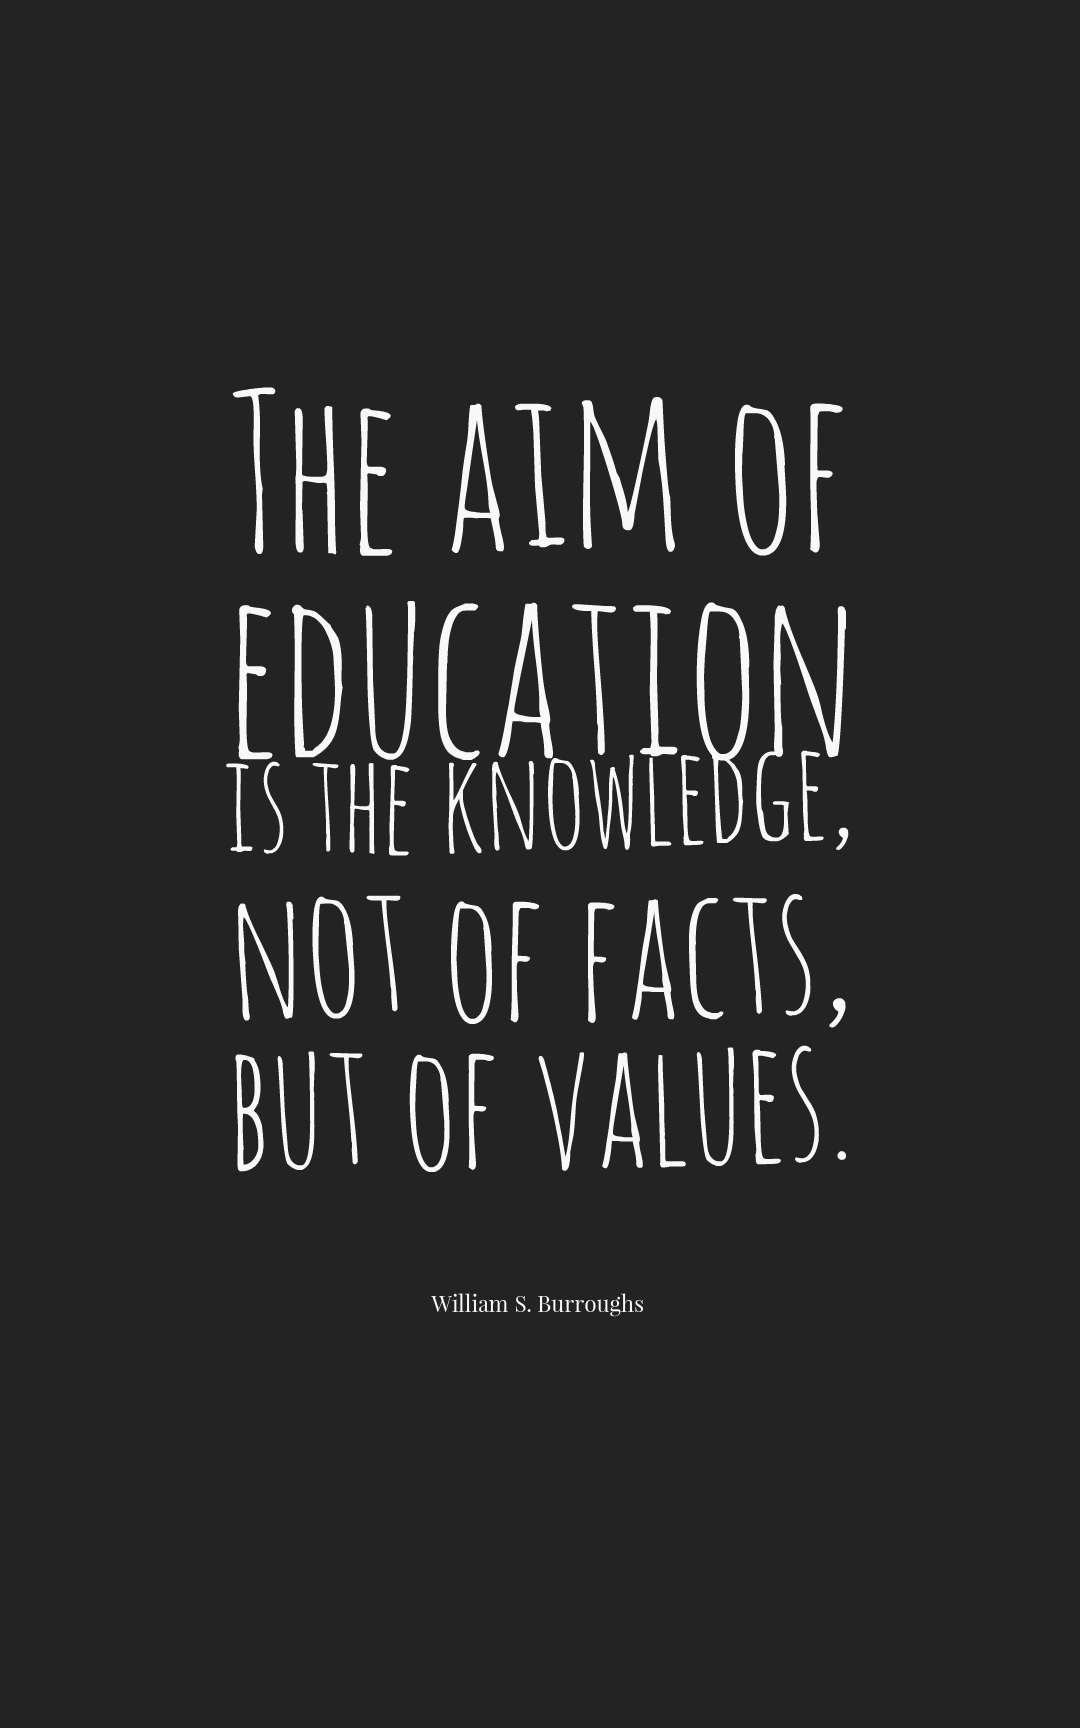 The aim of education is the knowledge, not of facts, but of values.